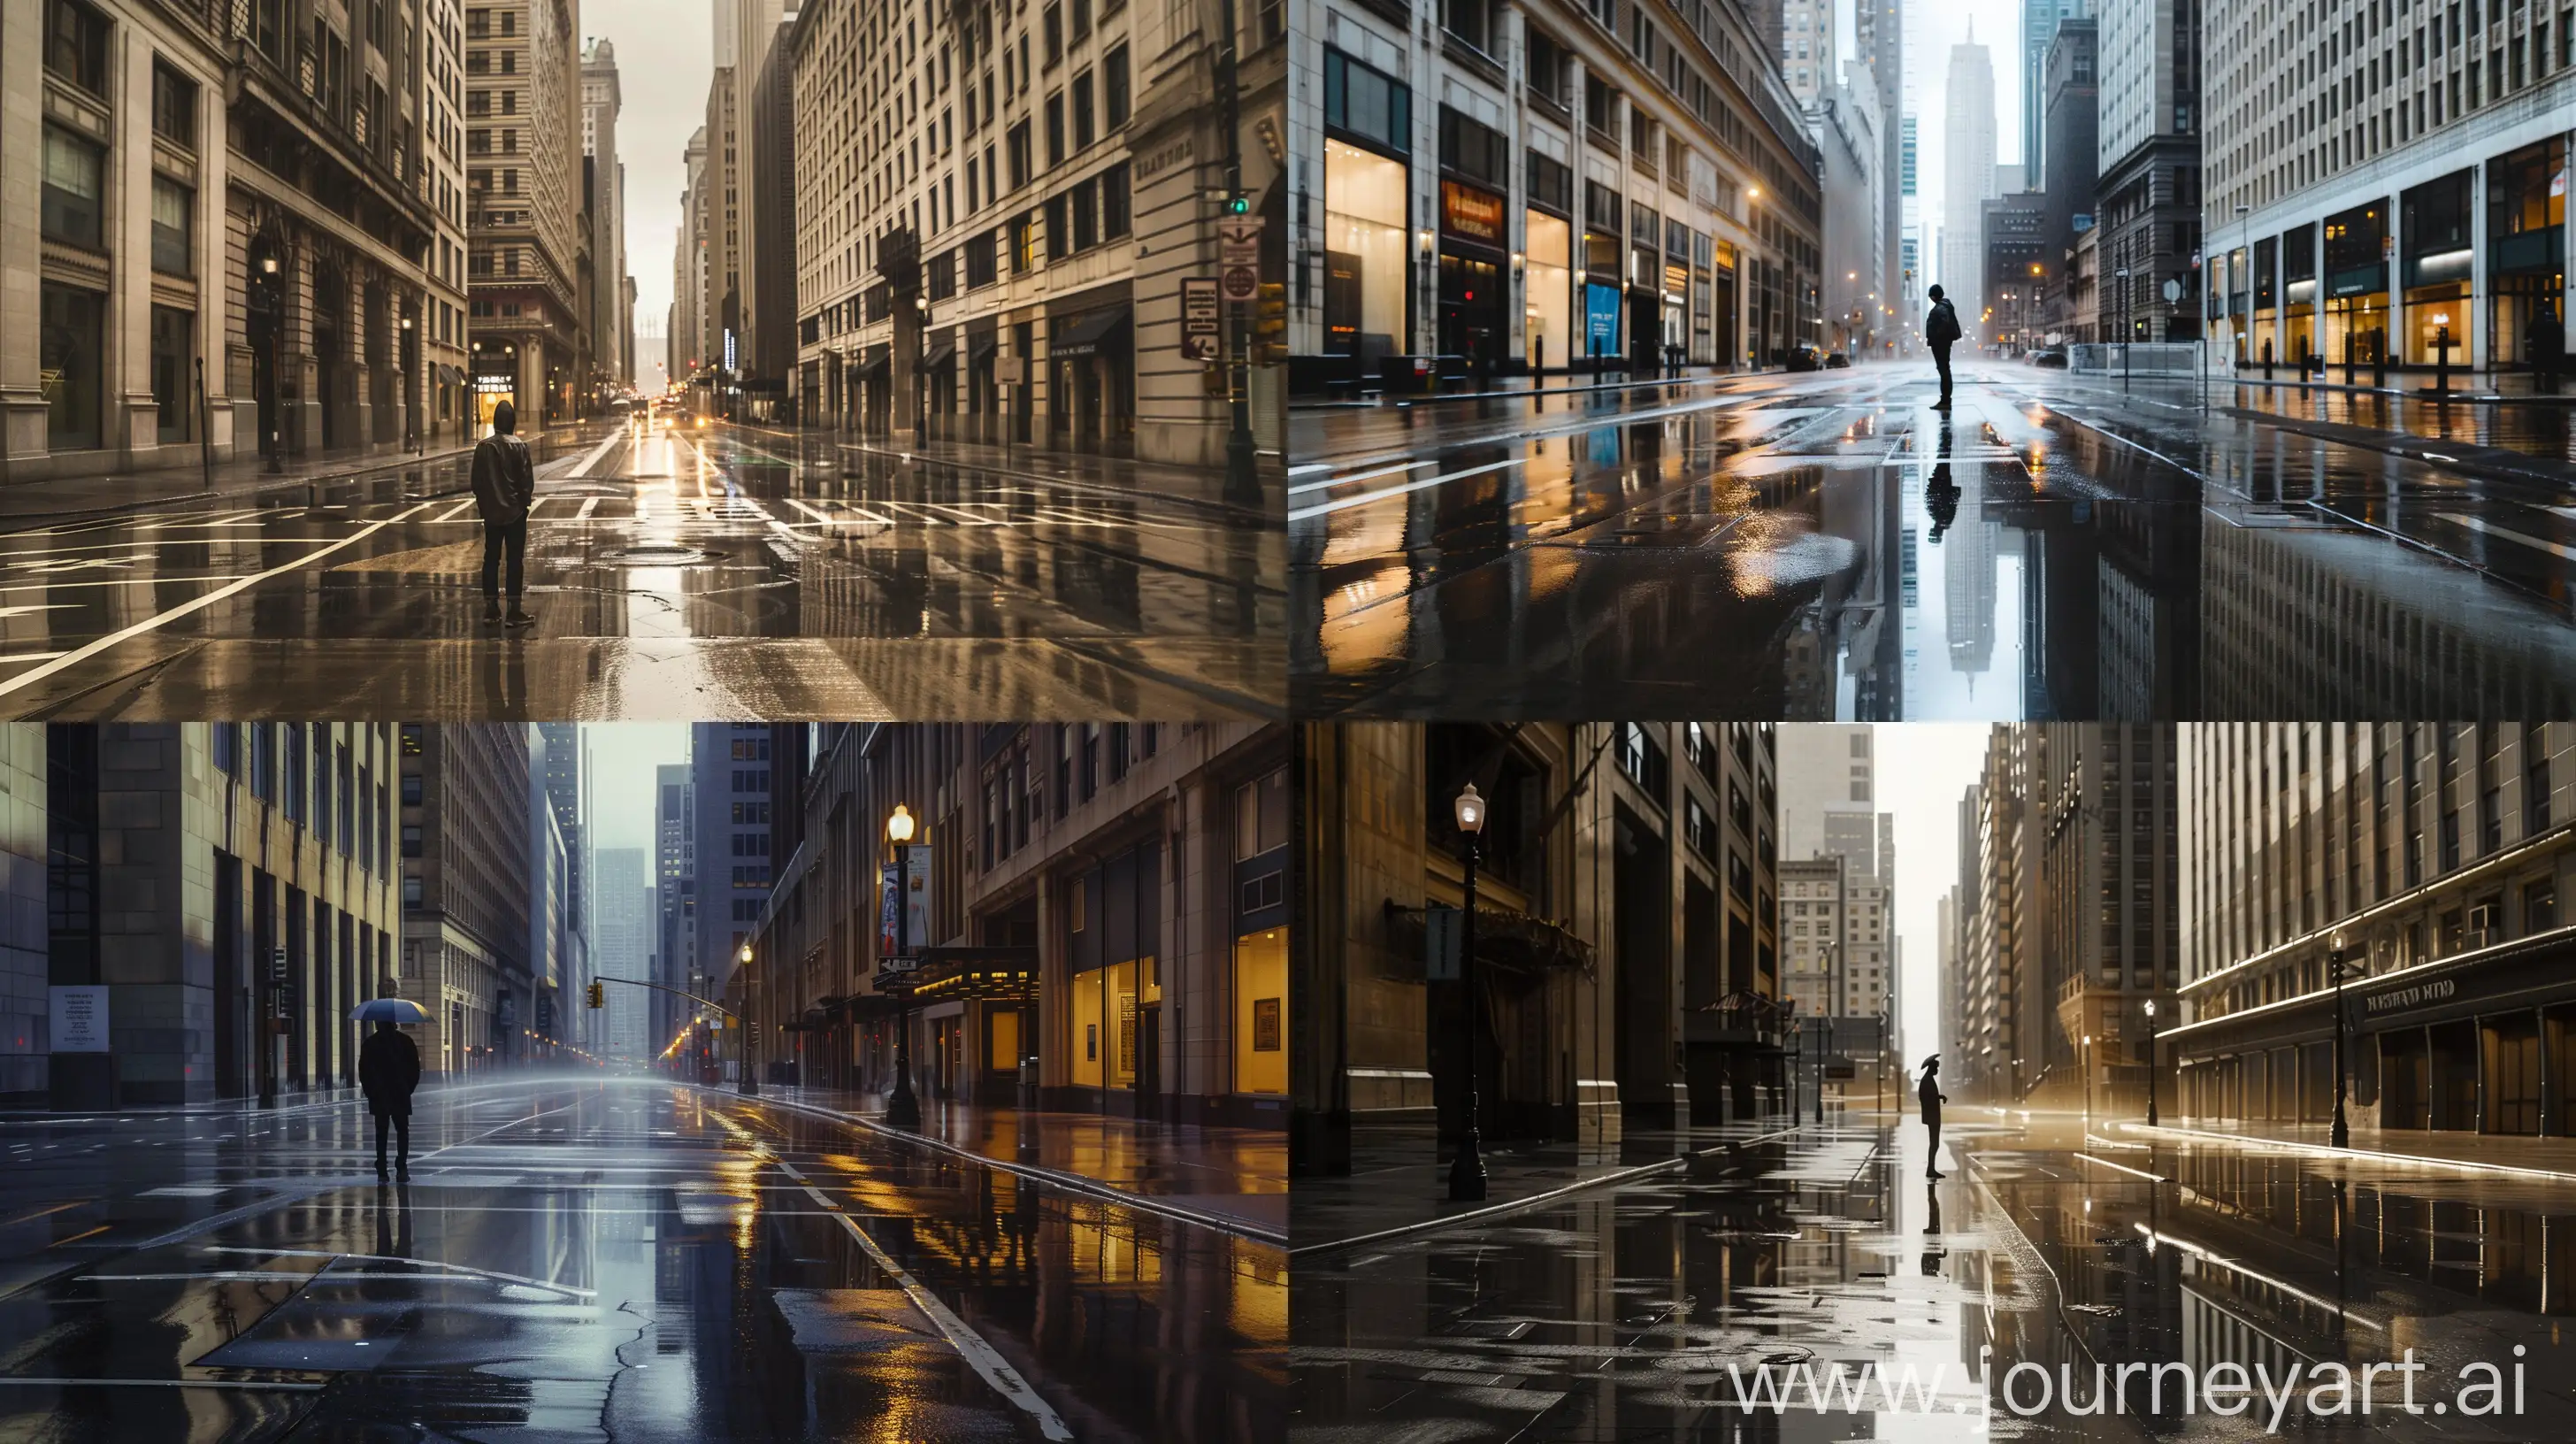 "An early morning scene capturing a solitary figure standing on a rain-slicked street in a sprawling metropolis, surrounded by the imposing architecture yet isolated in thought. The reflective surfaces and muted city sounds underscore the intimate moment of solitude amidst urban chaos. --ar 16:9 --s 0 --v 6.0 --style raw"